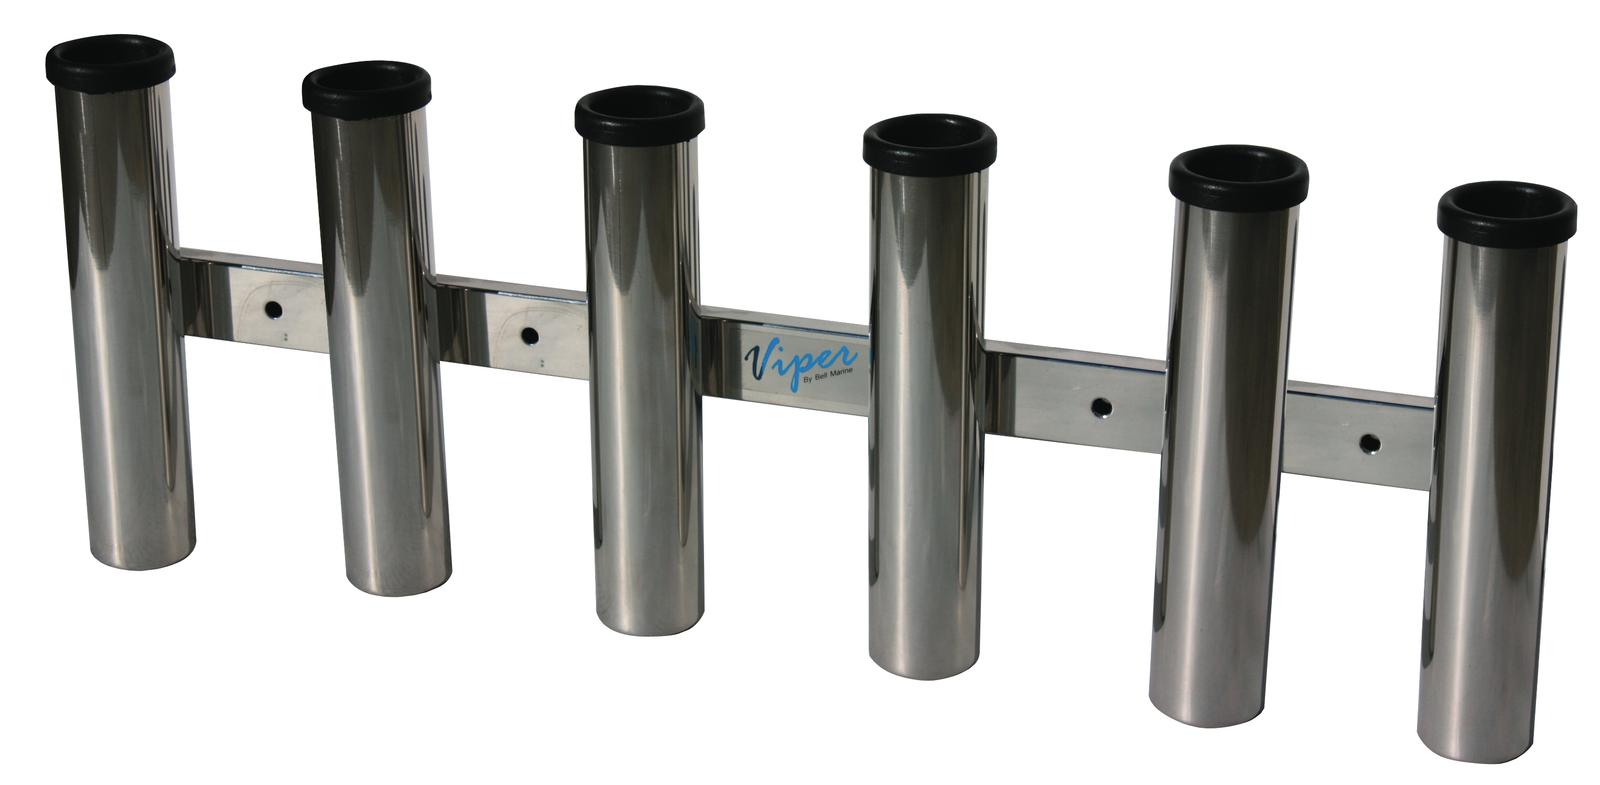 Viper Pro Stainless Steel Deluxe Six Rod Rack